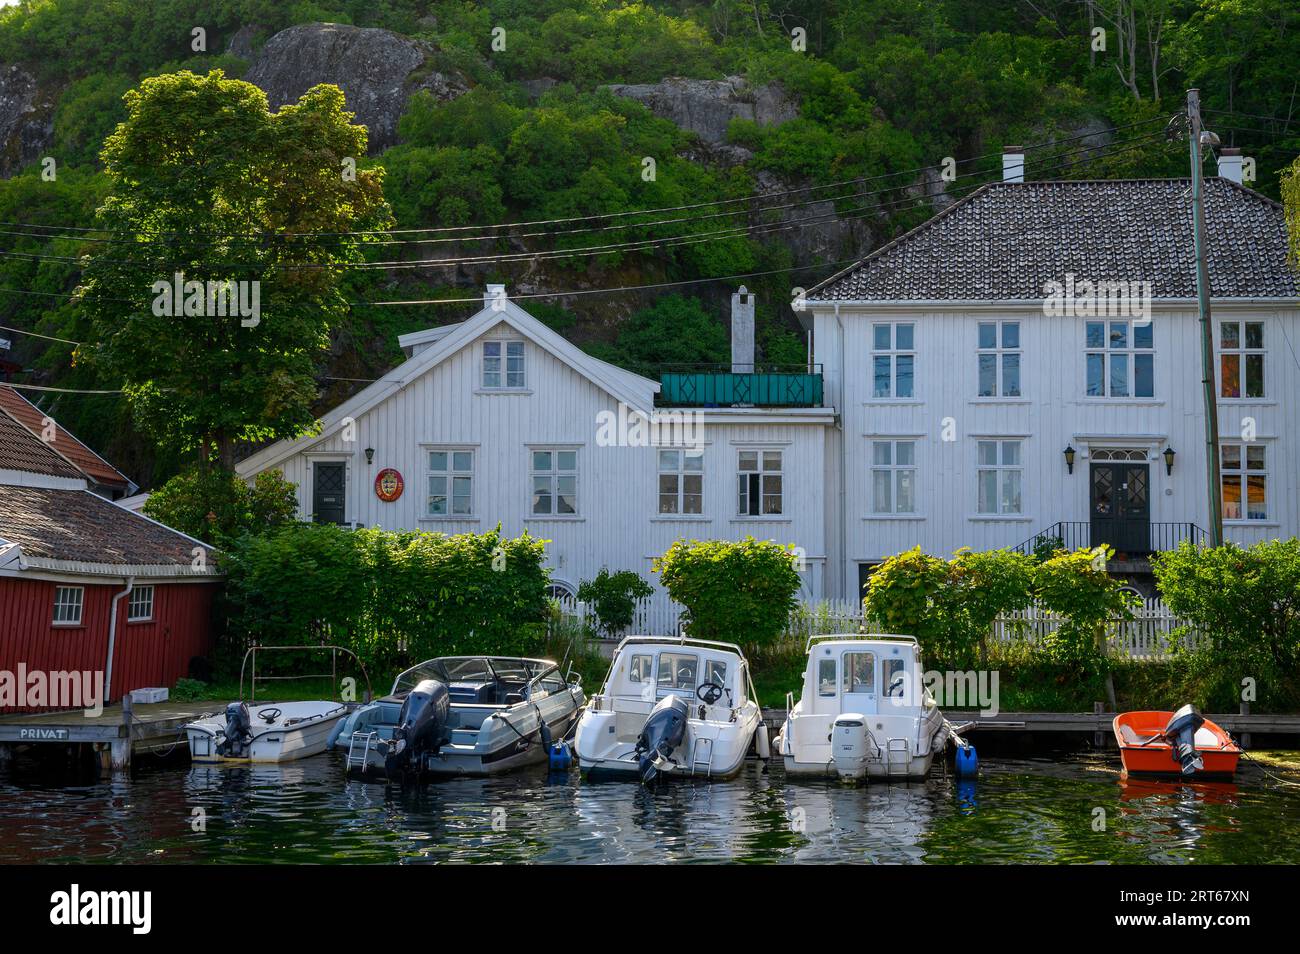 The Danish vice consulate building and moored boats in the well kept and charming seaside town of Kragero on the south coast. Telemark, Norway. Stock Photo